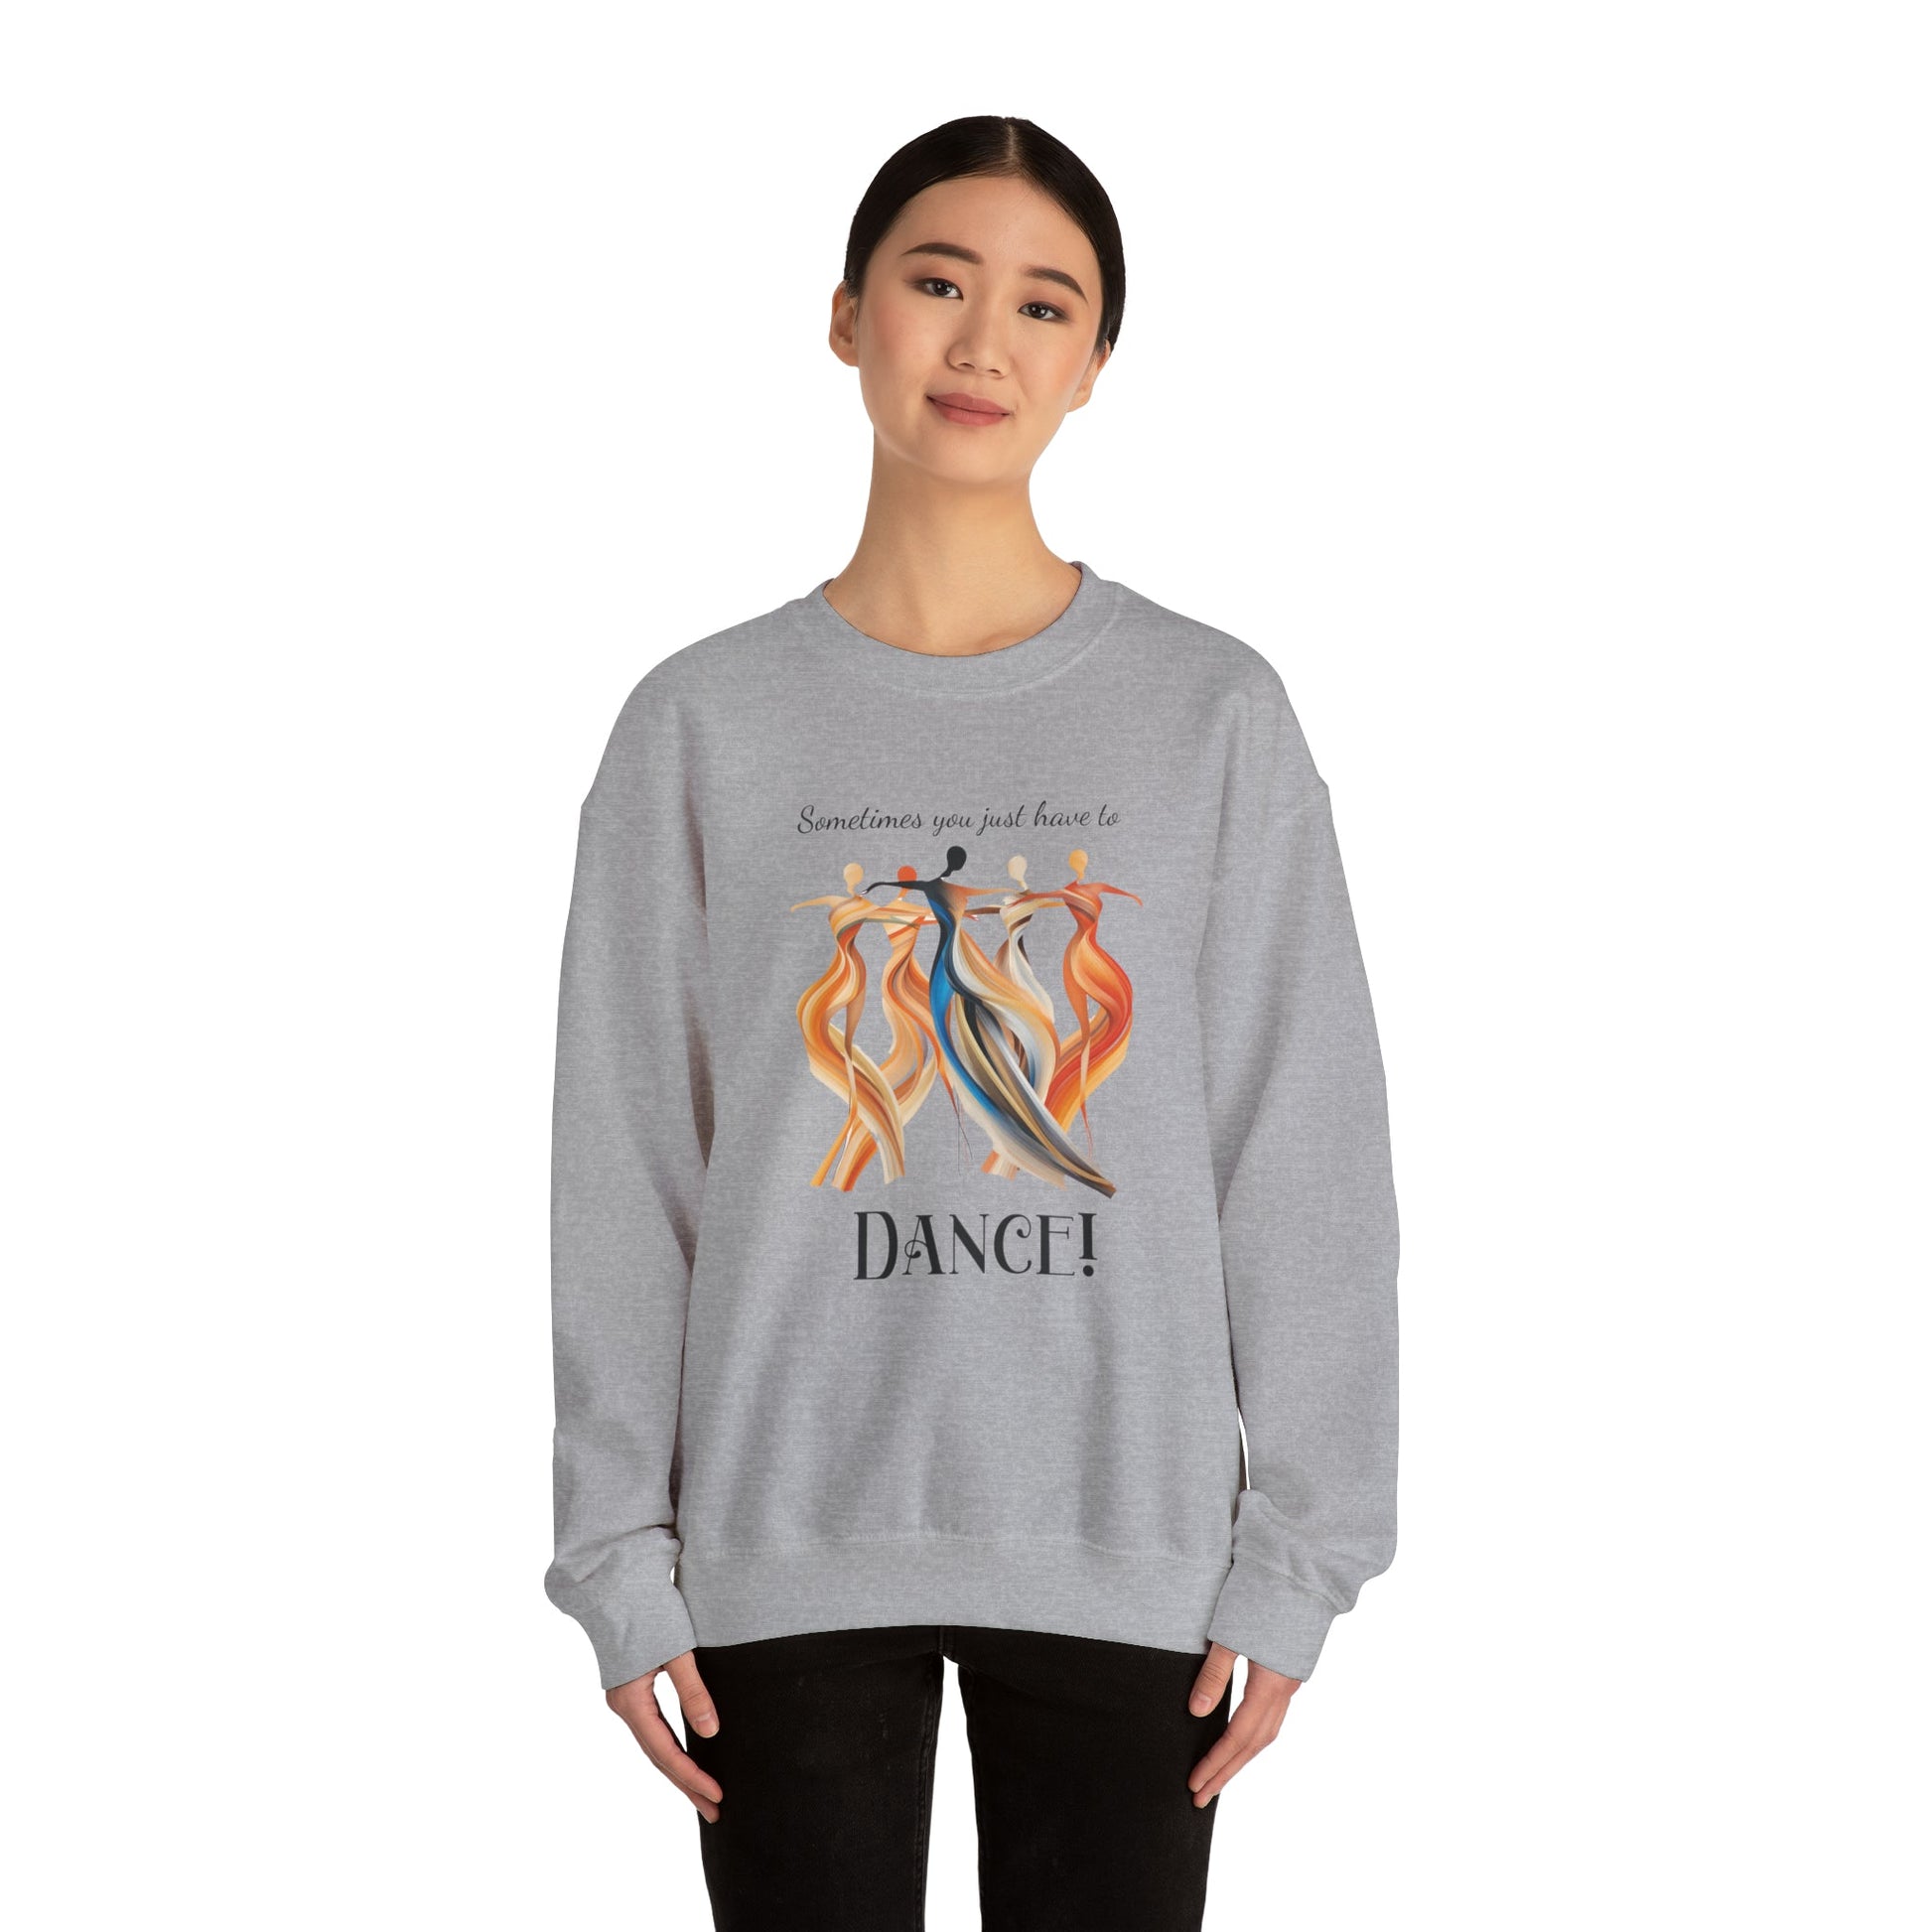 Love of Dance Sweatshirt - Sometimes You Just Have to Dance! Sweater, Brilliant Color and Emotion, Adult-Youth, Dance Lover, Gift for Dance - FlooredByArt